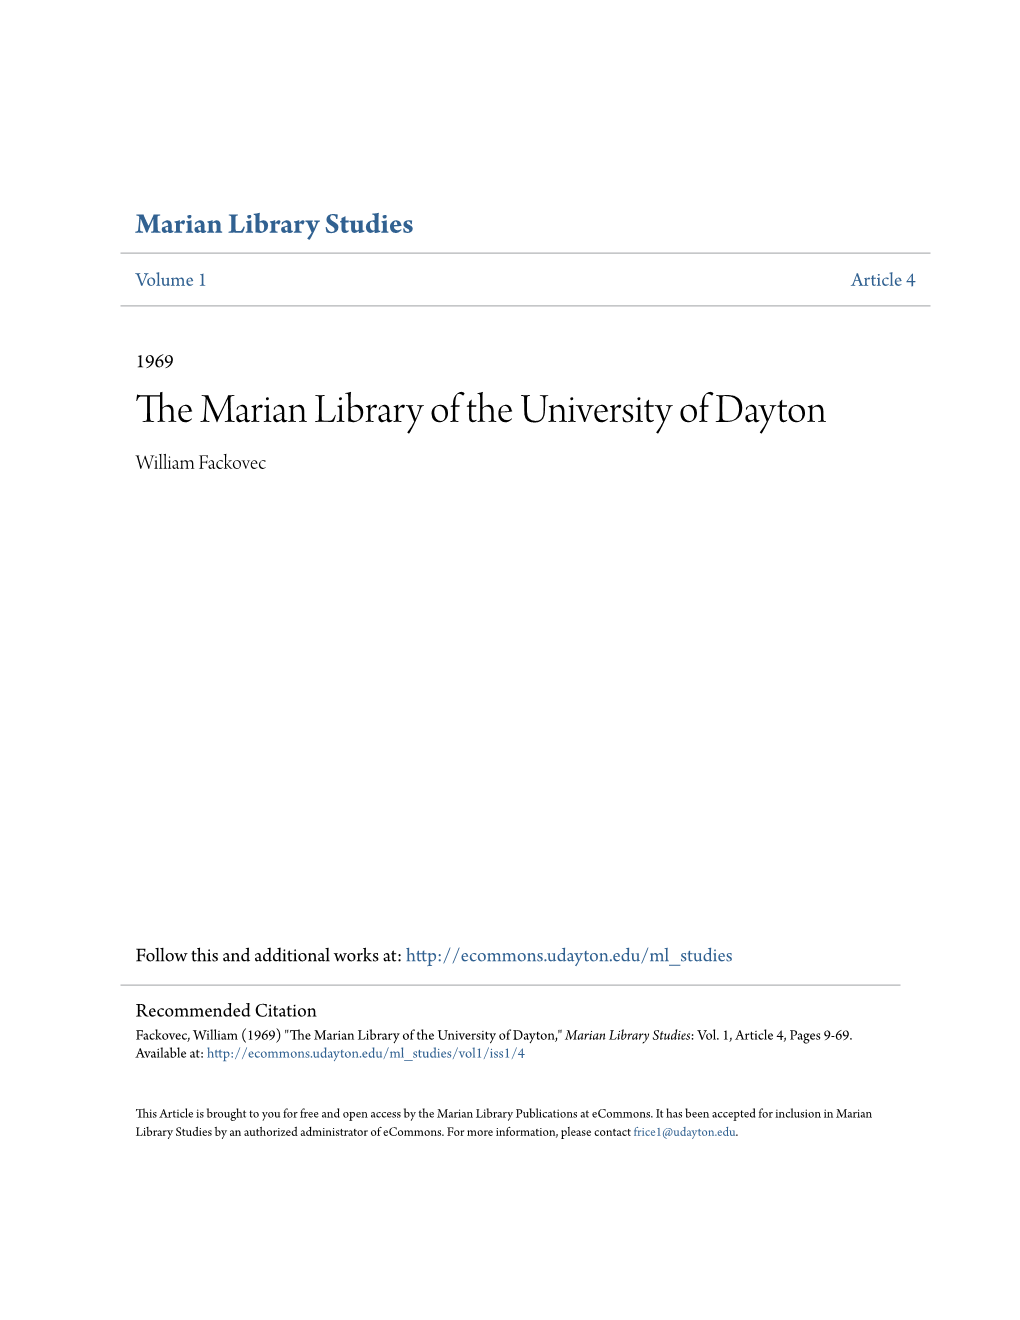 The Marian Library of the University of Dayton